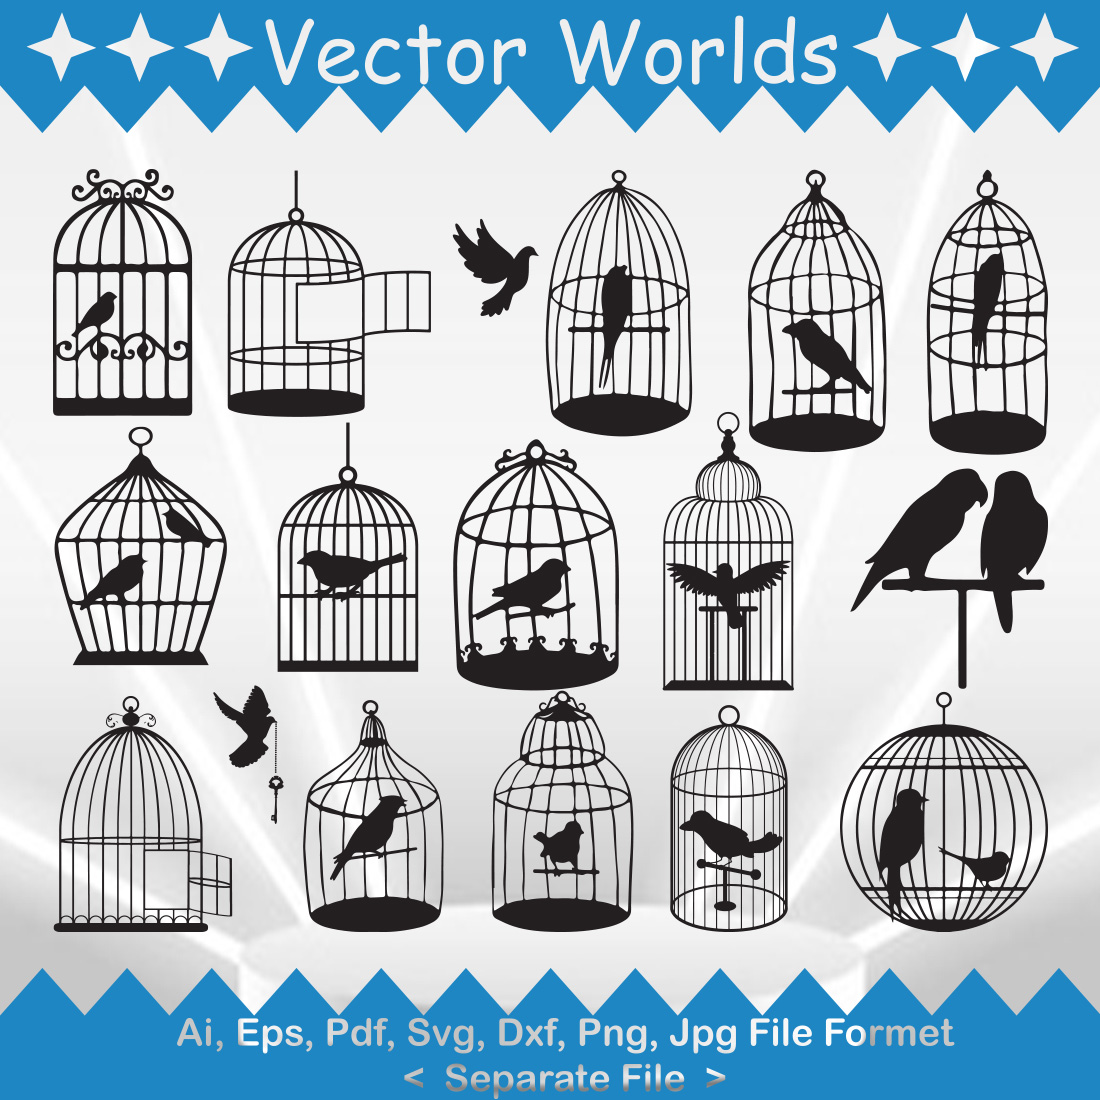 Set of bird cages with birds in them.